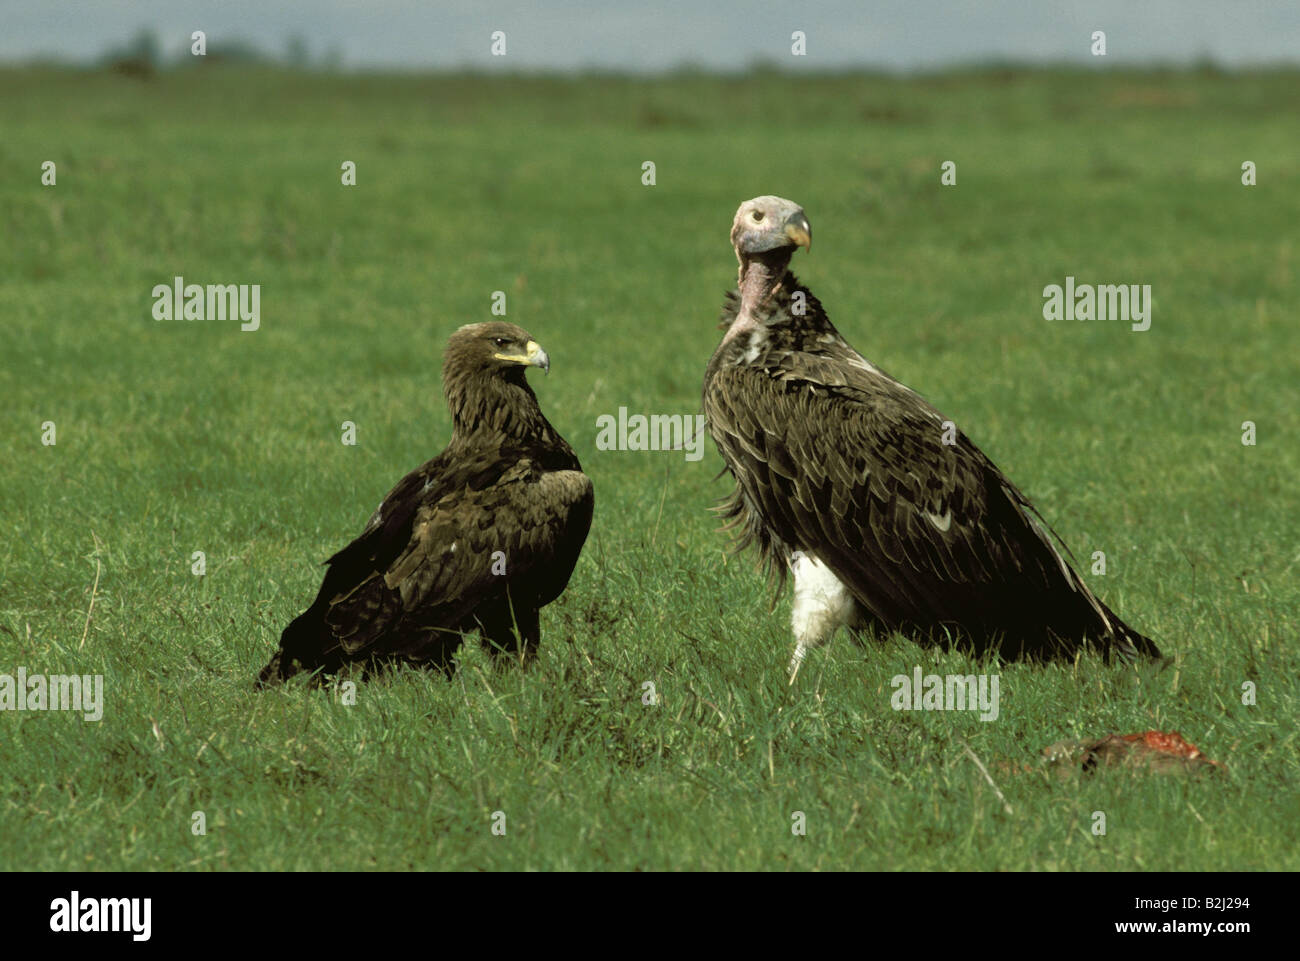 zoology / animals, birds, raptors, Lappet-faced Vulture, (Torgos  tracheliotus), and Tawny Eagle, (Aquila rapax), sitting in gras Stock Photo  - Alamy